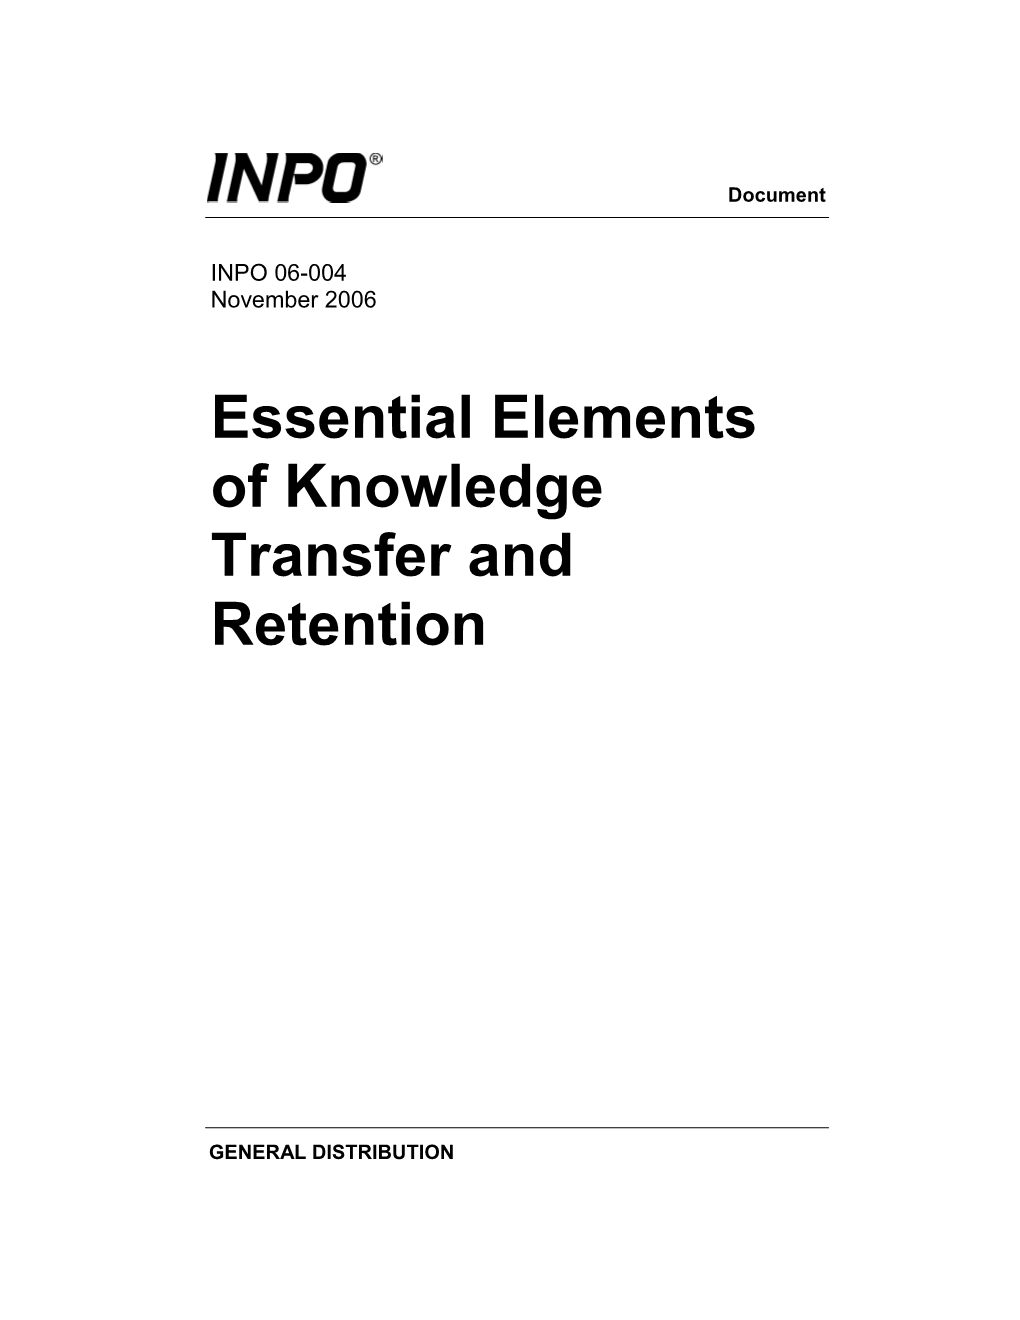 Essential Elements of Knowledge Transfer and Retention